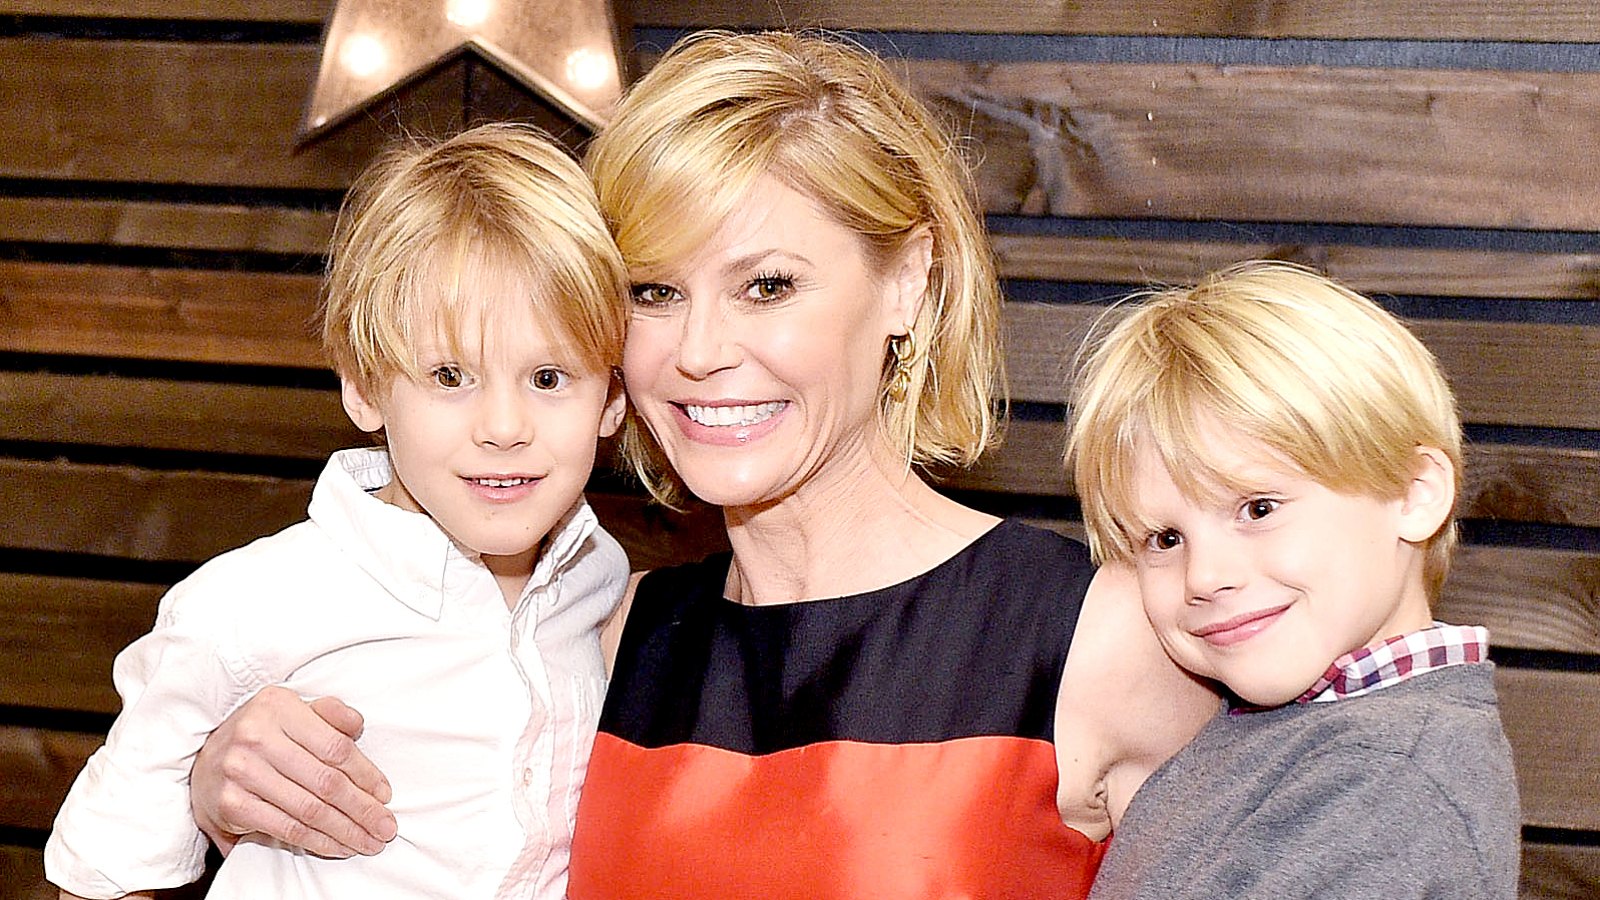 Julie Bowen and sons attend the Baby2Baby Holiday Party Presented By Tiny Prints At Montage Beverly Hills on December 6, 2015 in Beverly Hills, California.